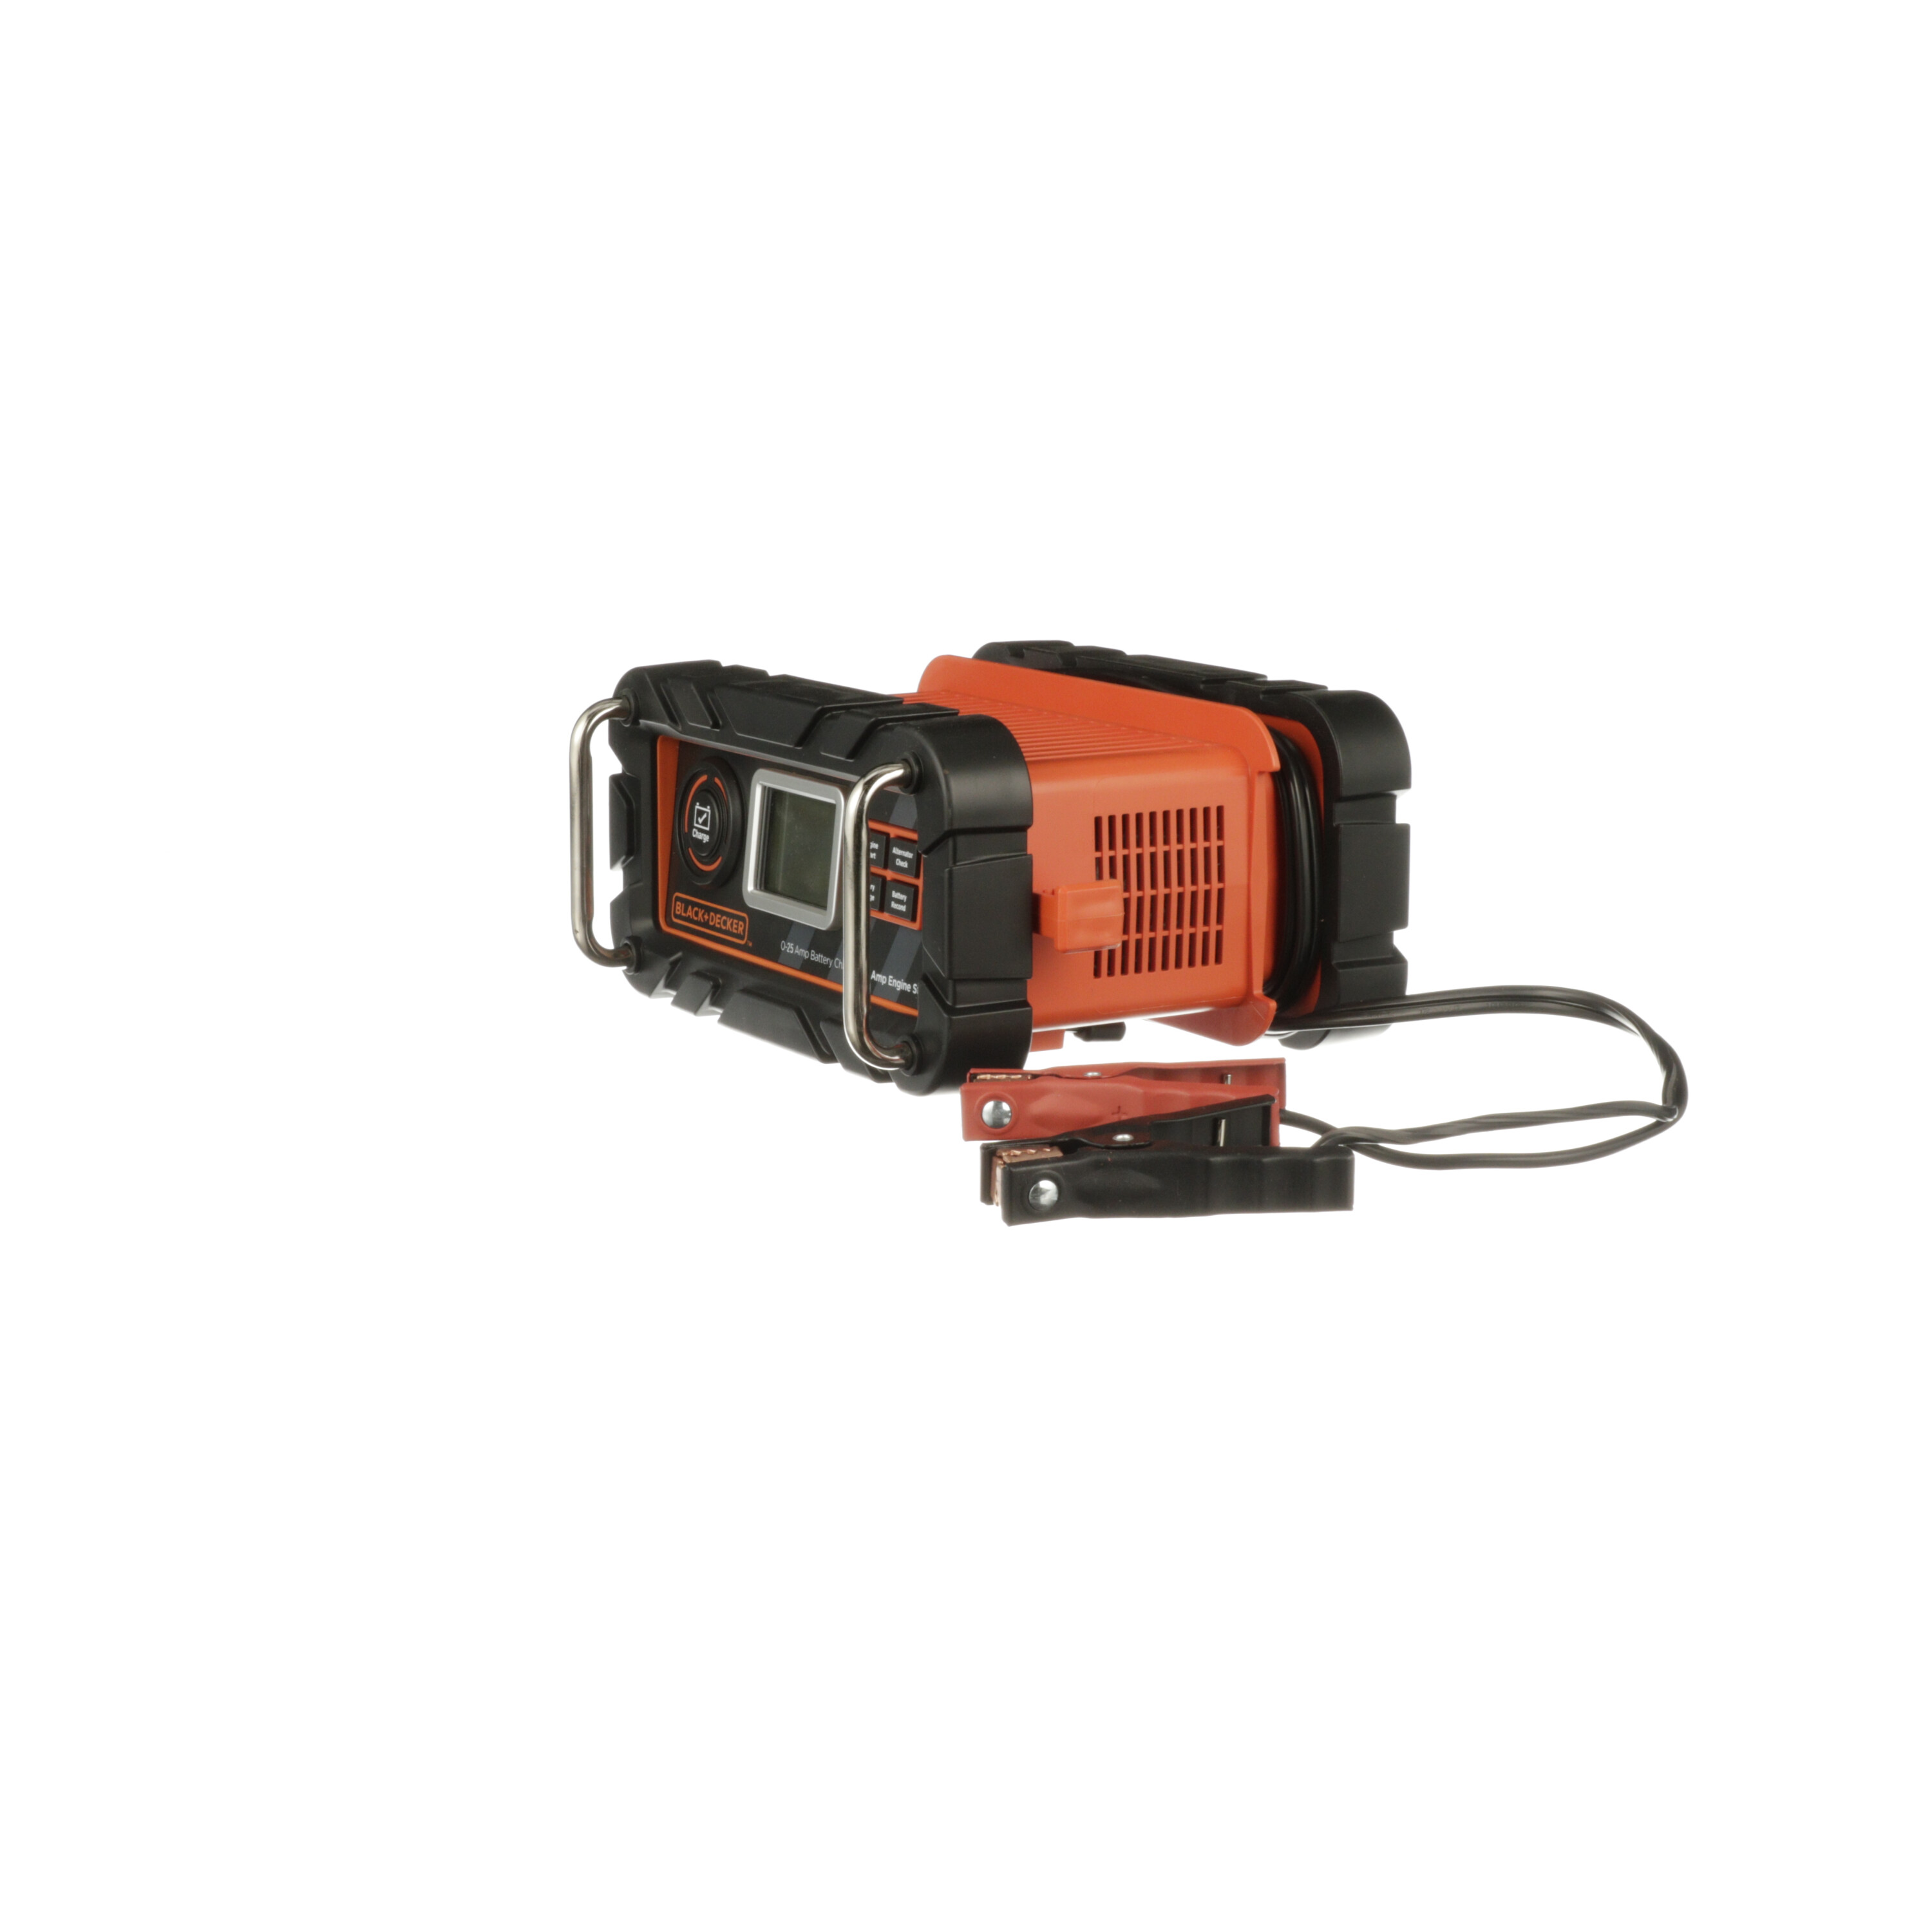 Black & Decker BC25-B2 Automatic Control Smart Battery Charger, Output  Voltage: 12.8 V, 25 Amp